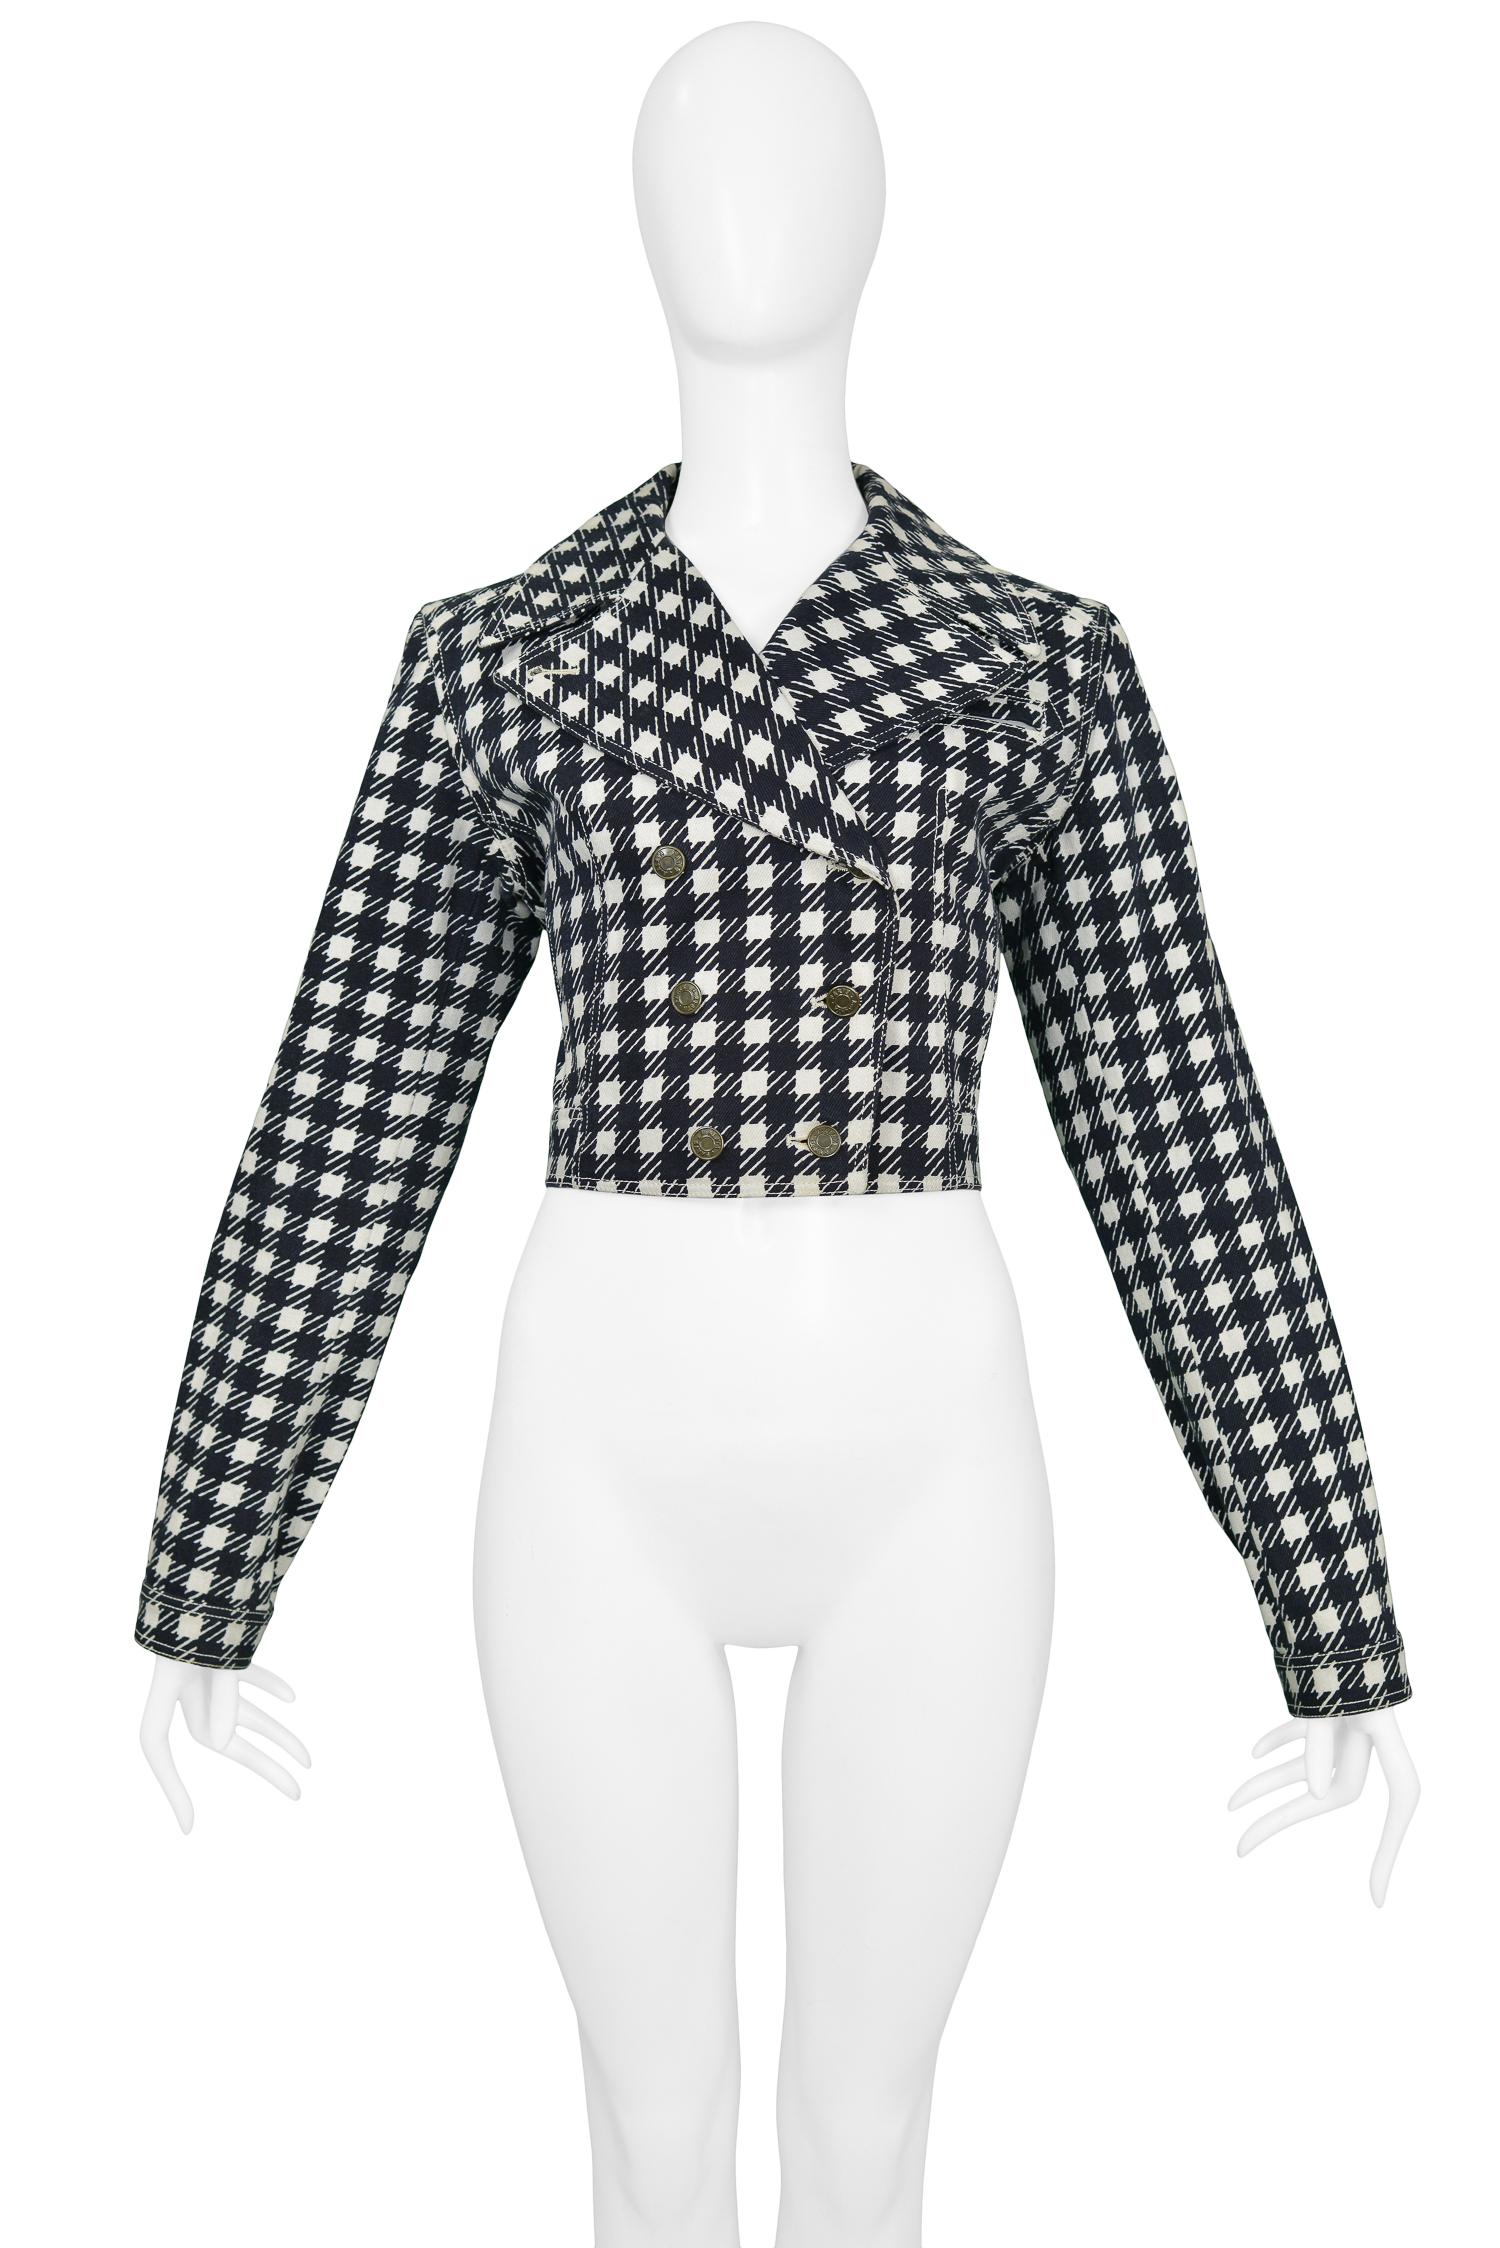 Vintage Alaia iconic black & white denim houndstooth 'Tati' jacket. Spring/Summer 1991 Collection. This jacket was worn on the runway by Farida Khelfa and additional pieces from this important collection were featured on Naomi Campbell in Ellen von